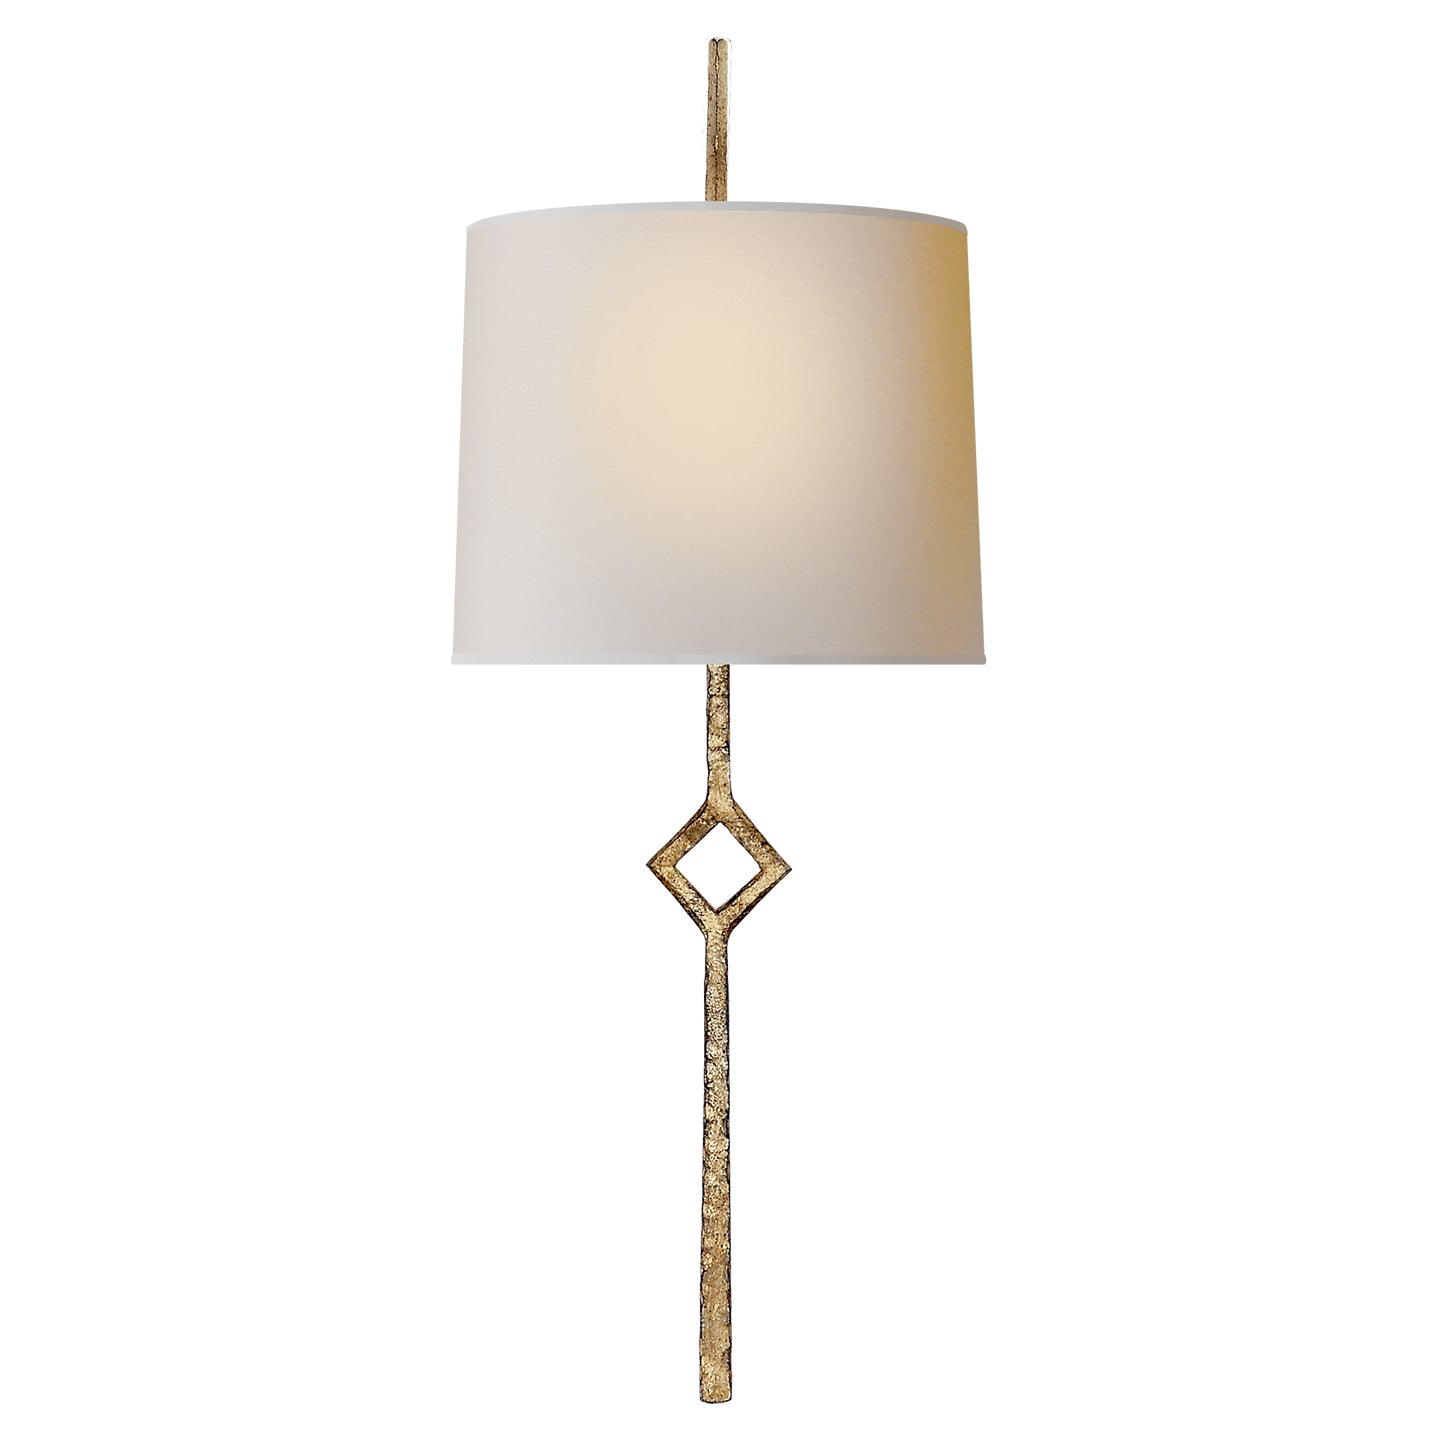 Load image into Gallery viewer, Visual Comfort Signature - S 2406GI-NP - One Light Wall Sconce - Cranston - Gilded Iron
